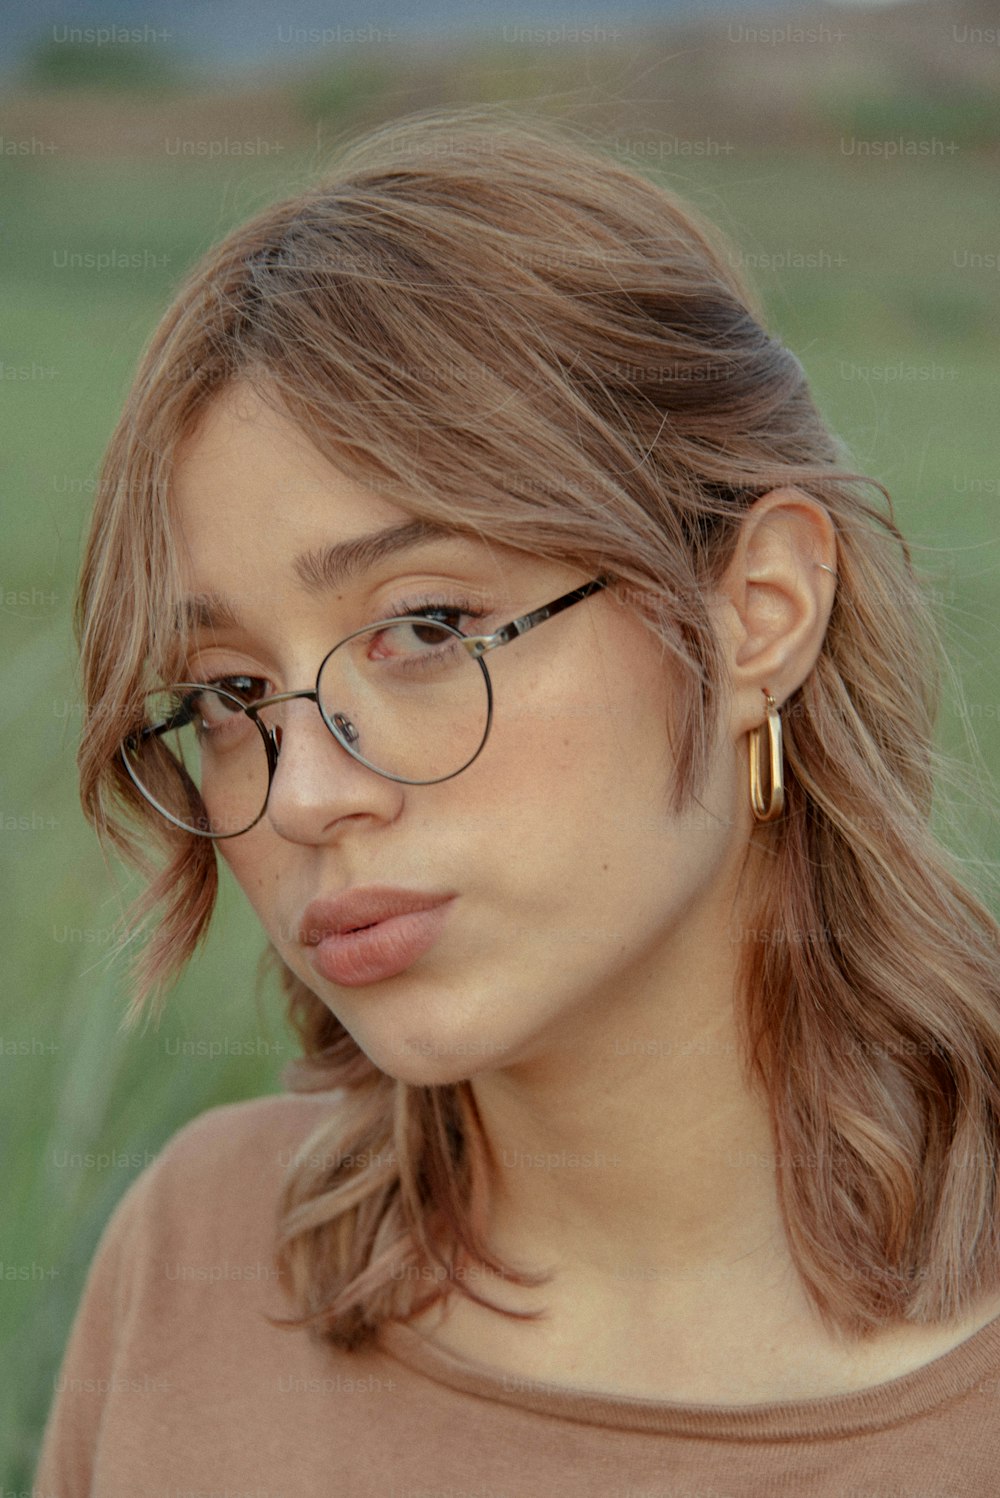 a woman with glasses sticking her tongue out